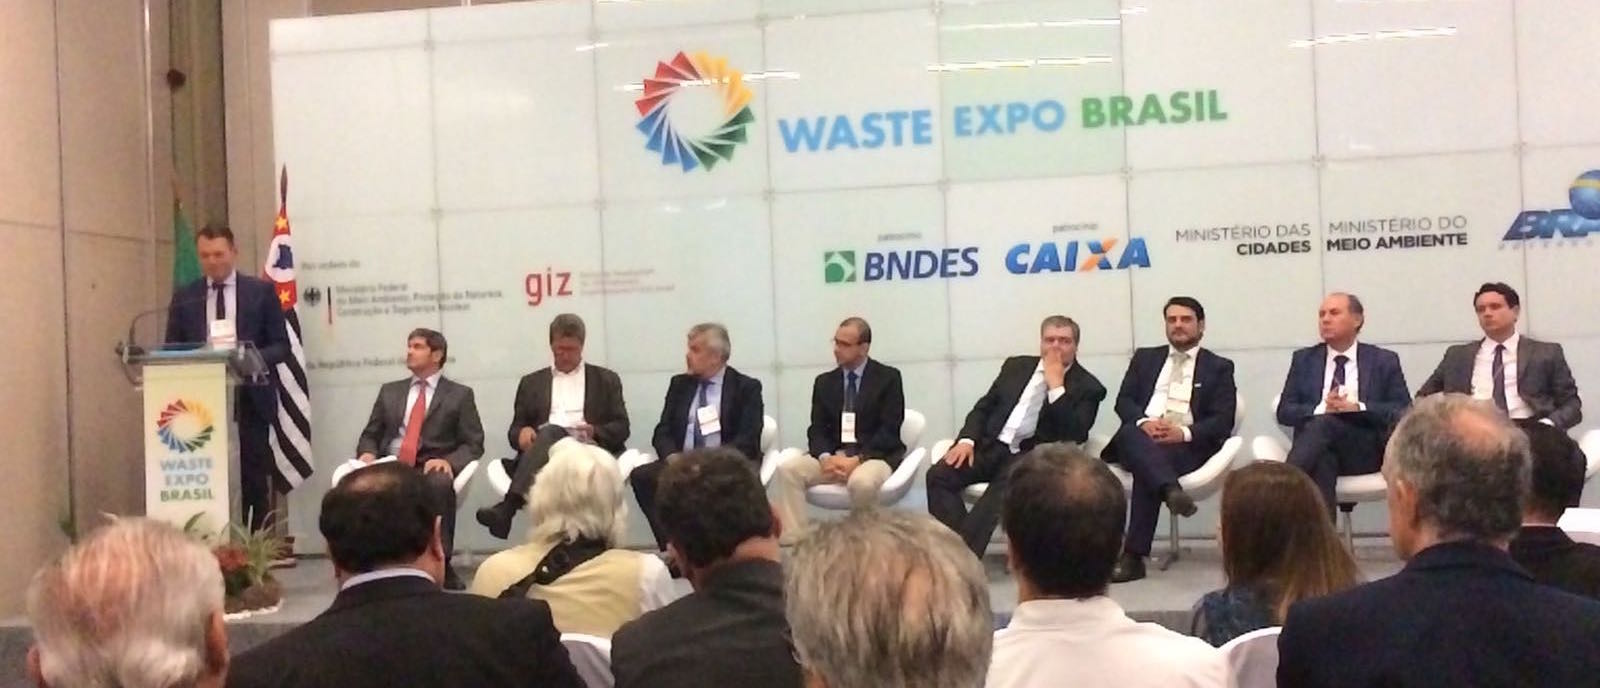 Waste Expo Brasil collaborates with IFAT